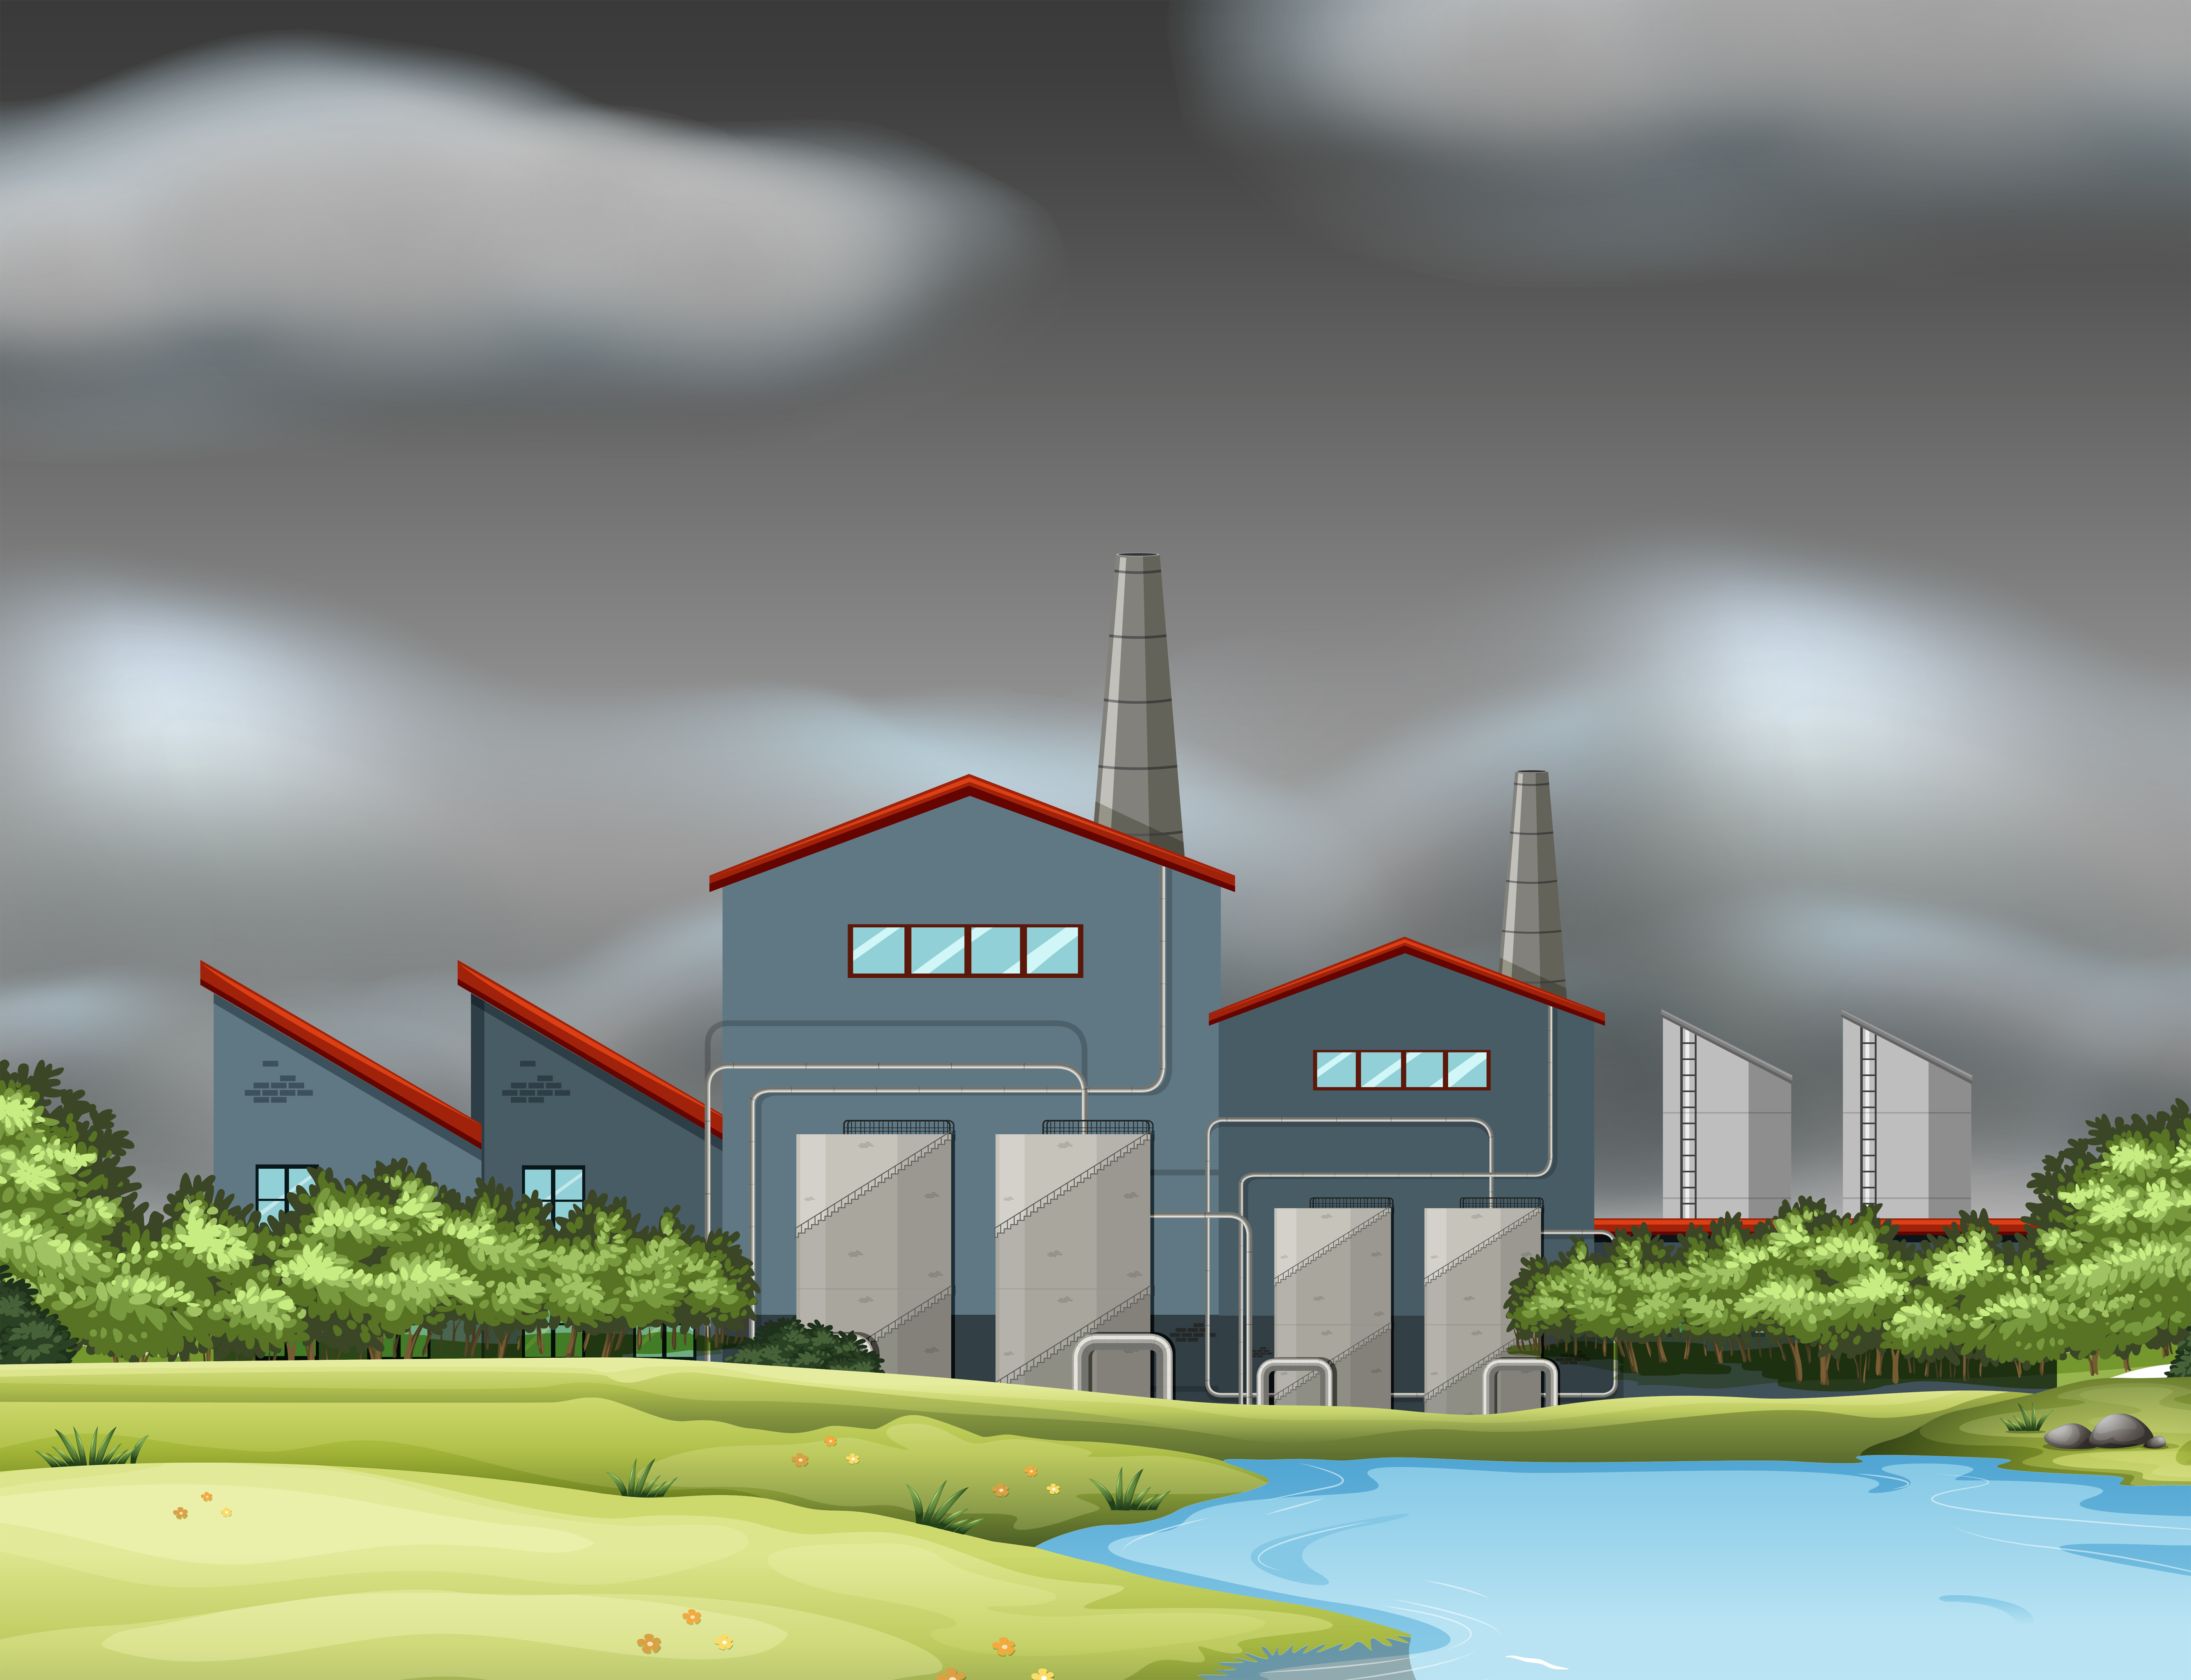 A Factory Scene In Cloudy Day Download Free Vectors Clipart Graphics Vector Art